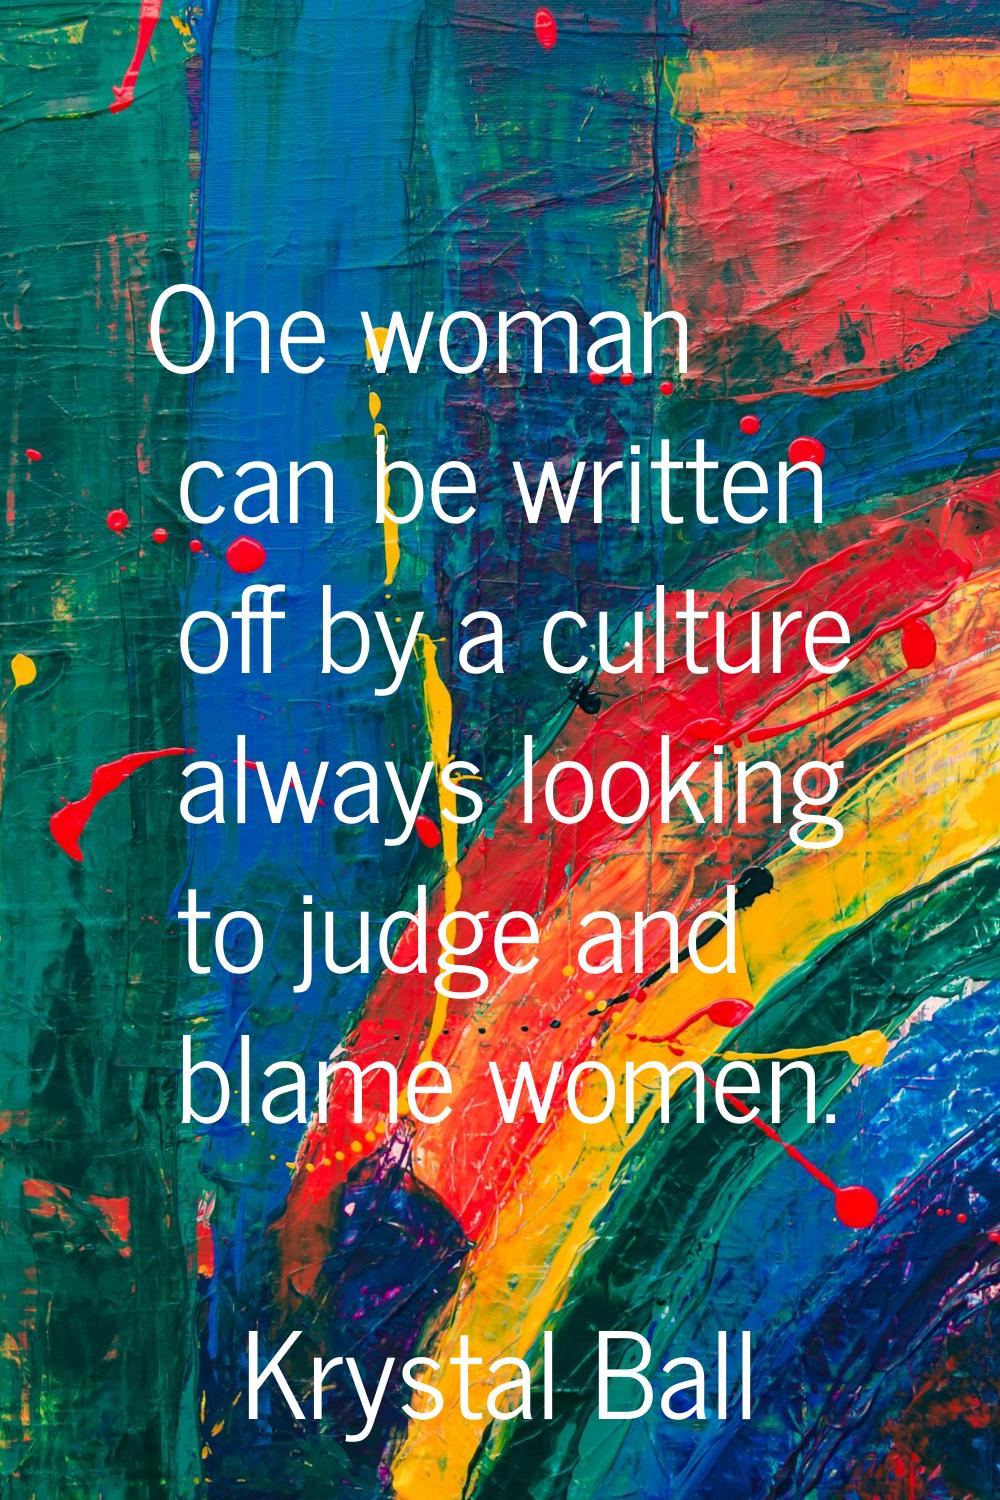 One woman can be written off by a culture always looking to judge and blame women.